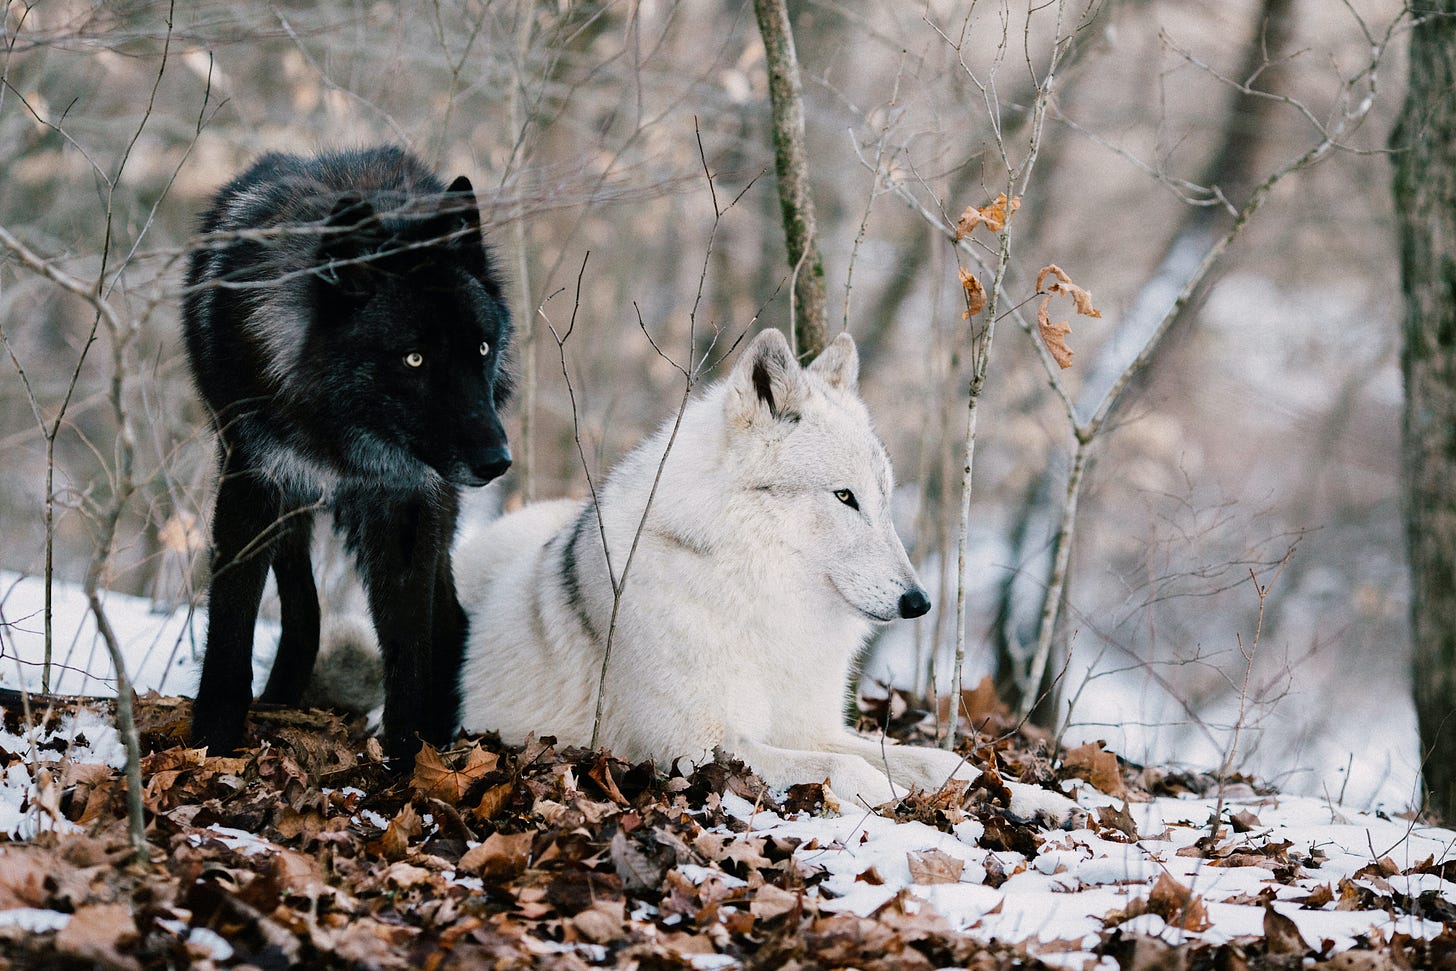 Two wolves sit next to each other in the forest. The black wolf stands behind the white wolf, who is seated.